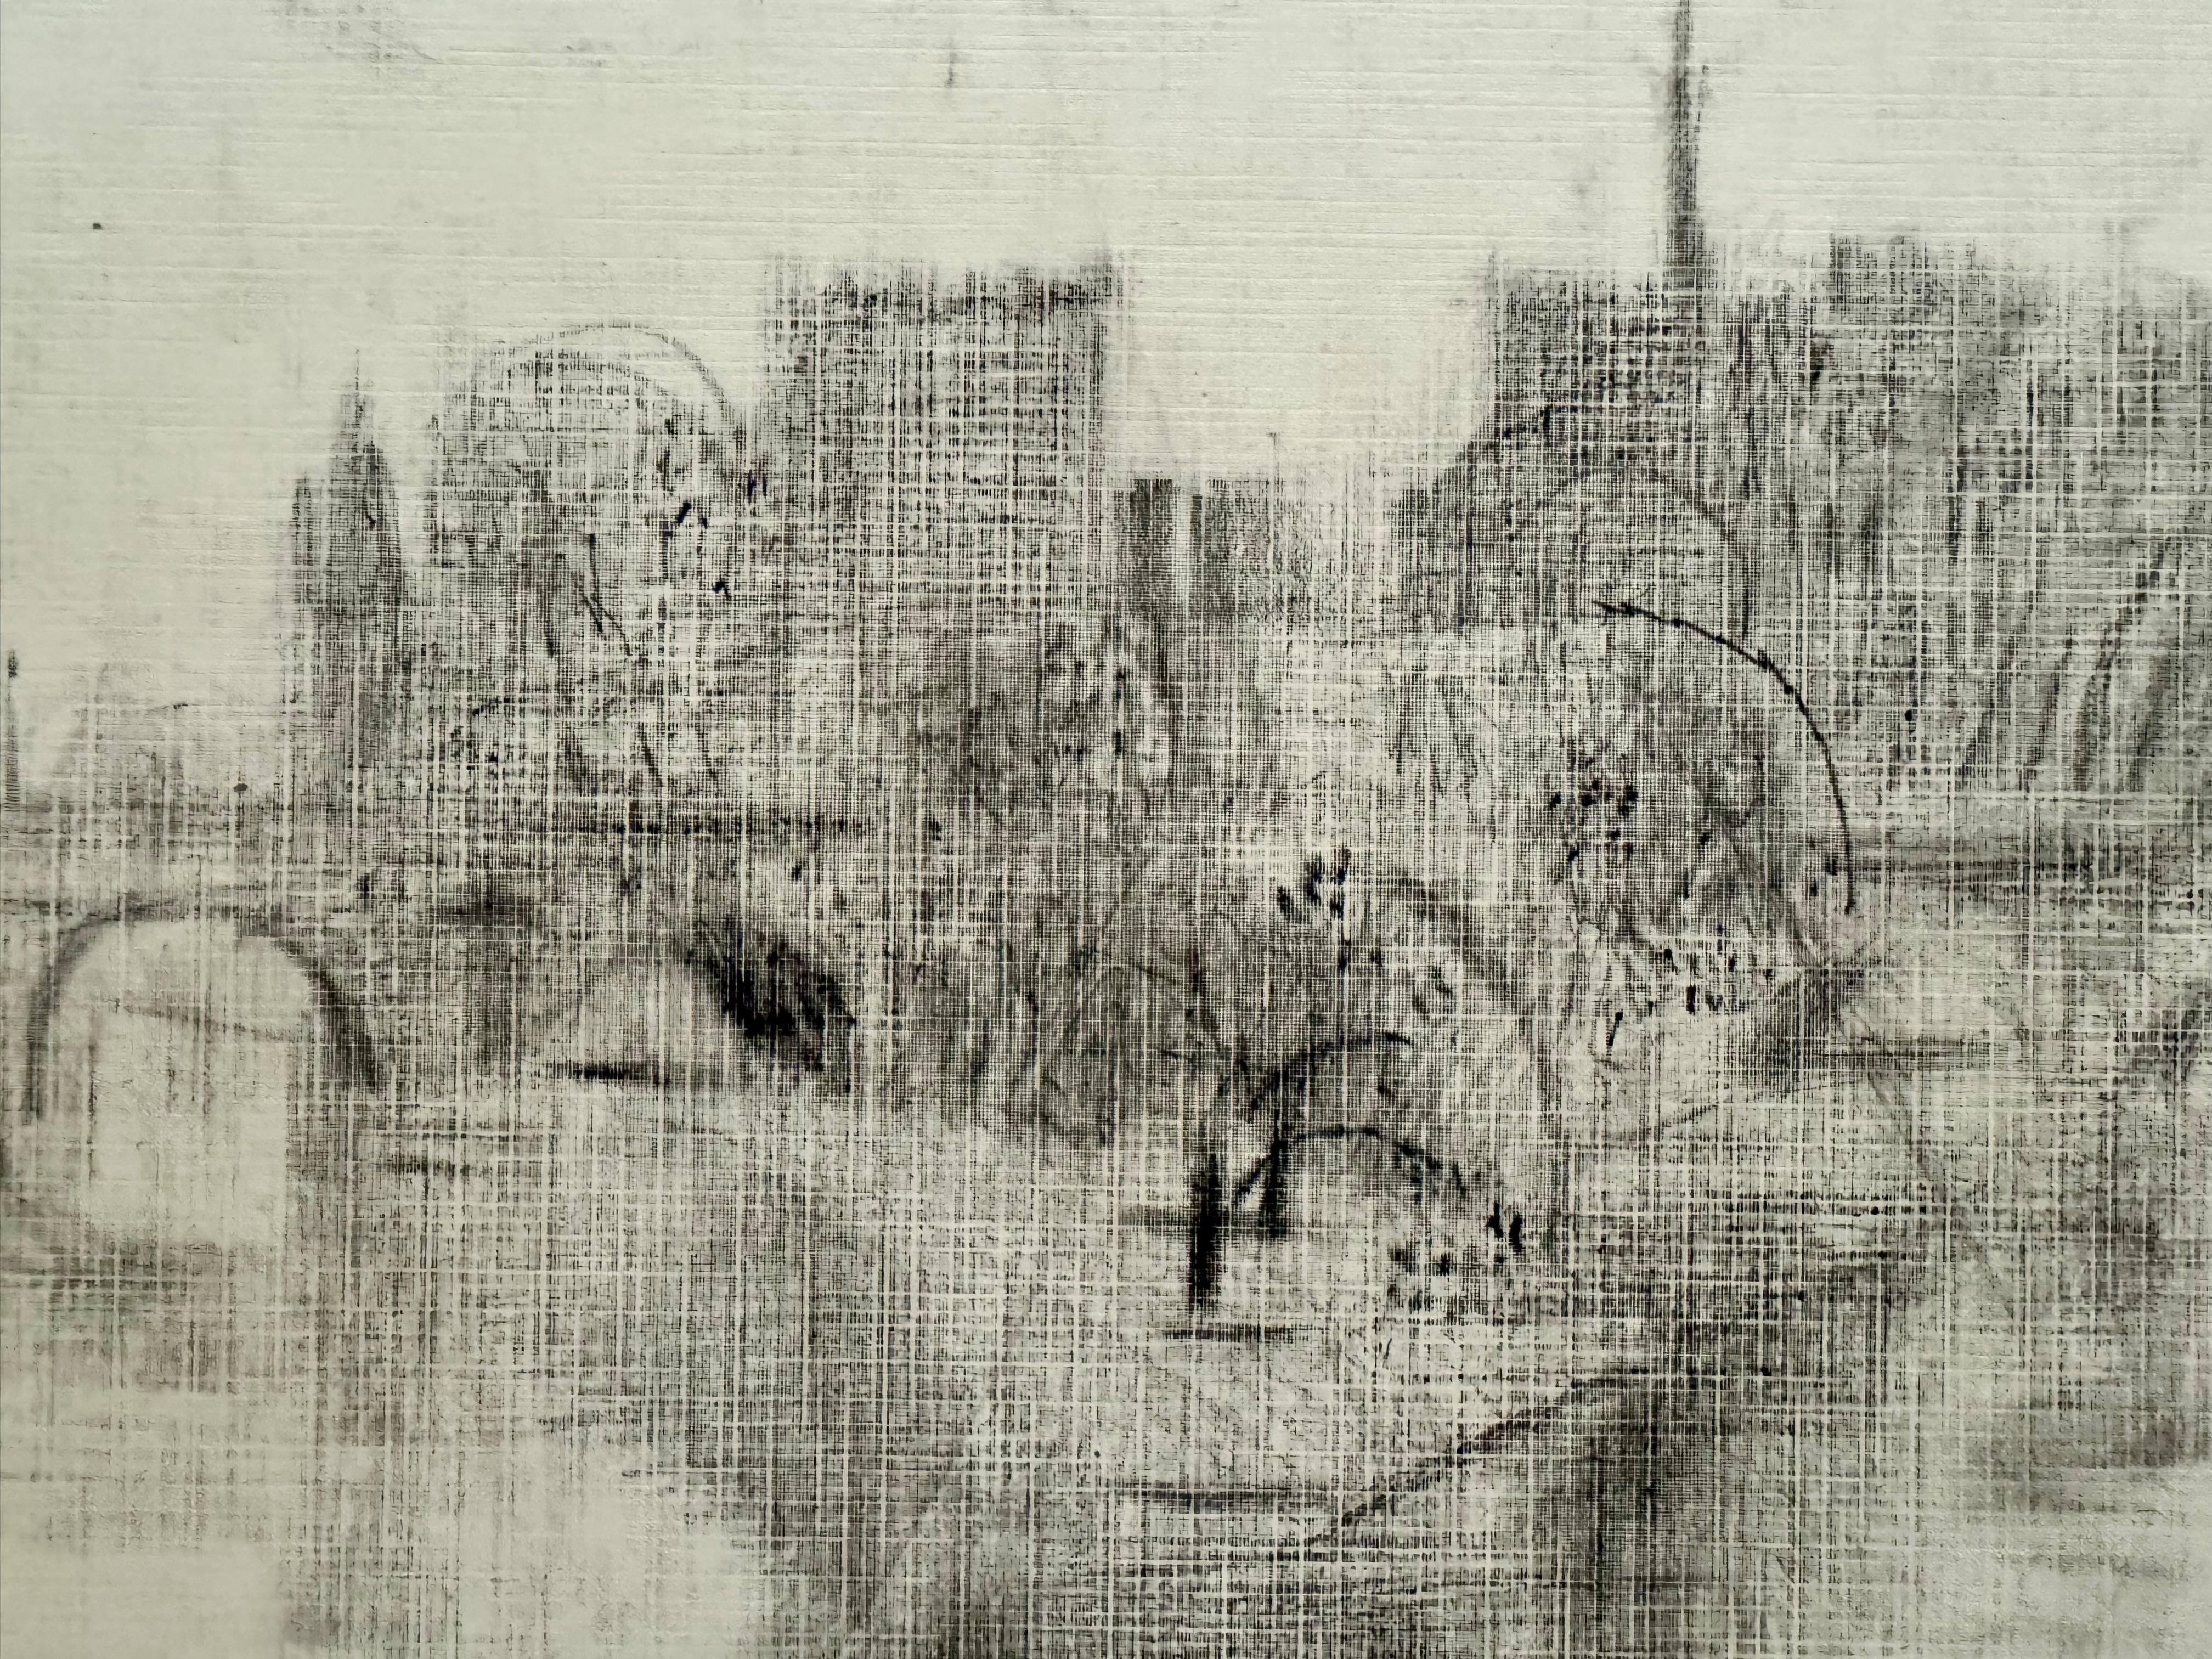 René Genis (French 1922-2004)  “brume au vert Galant, Paris” / Mist on Green-Galant, Paris.  Graphite on woven paper, laid to mat board, framed under glass.   Signed lower right.  Drawing size 19” x 12”.

A beautiful original piece of art from a